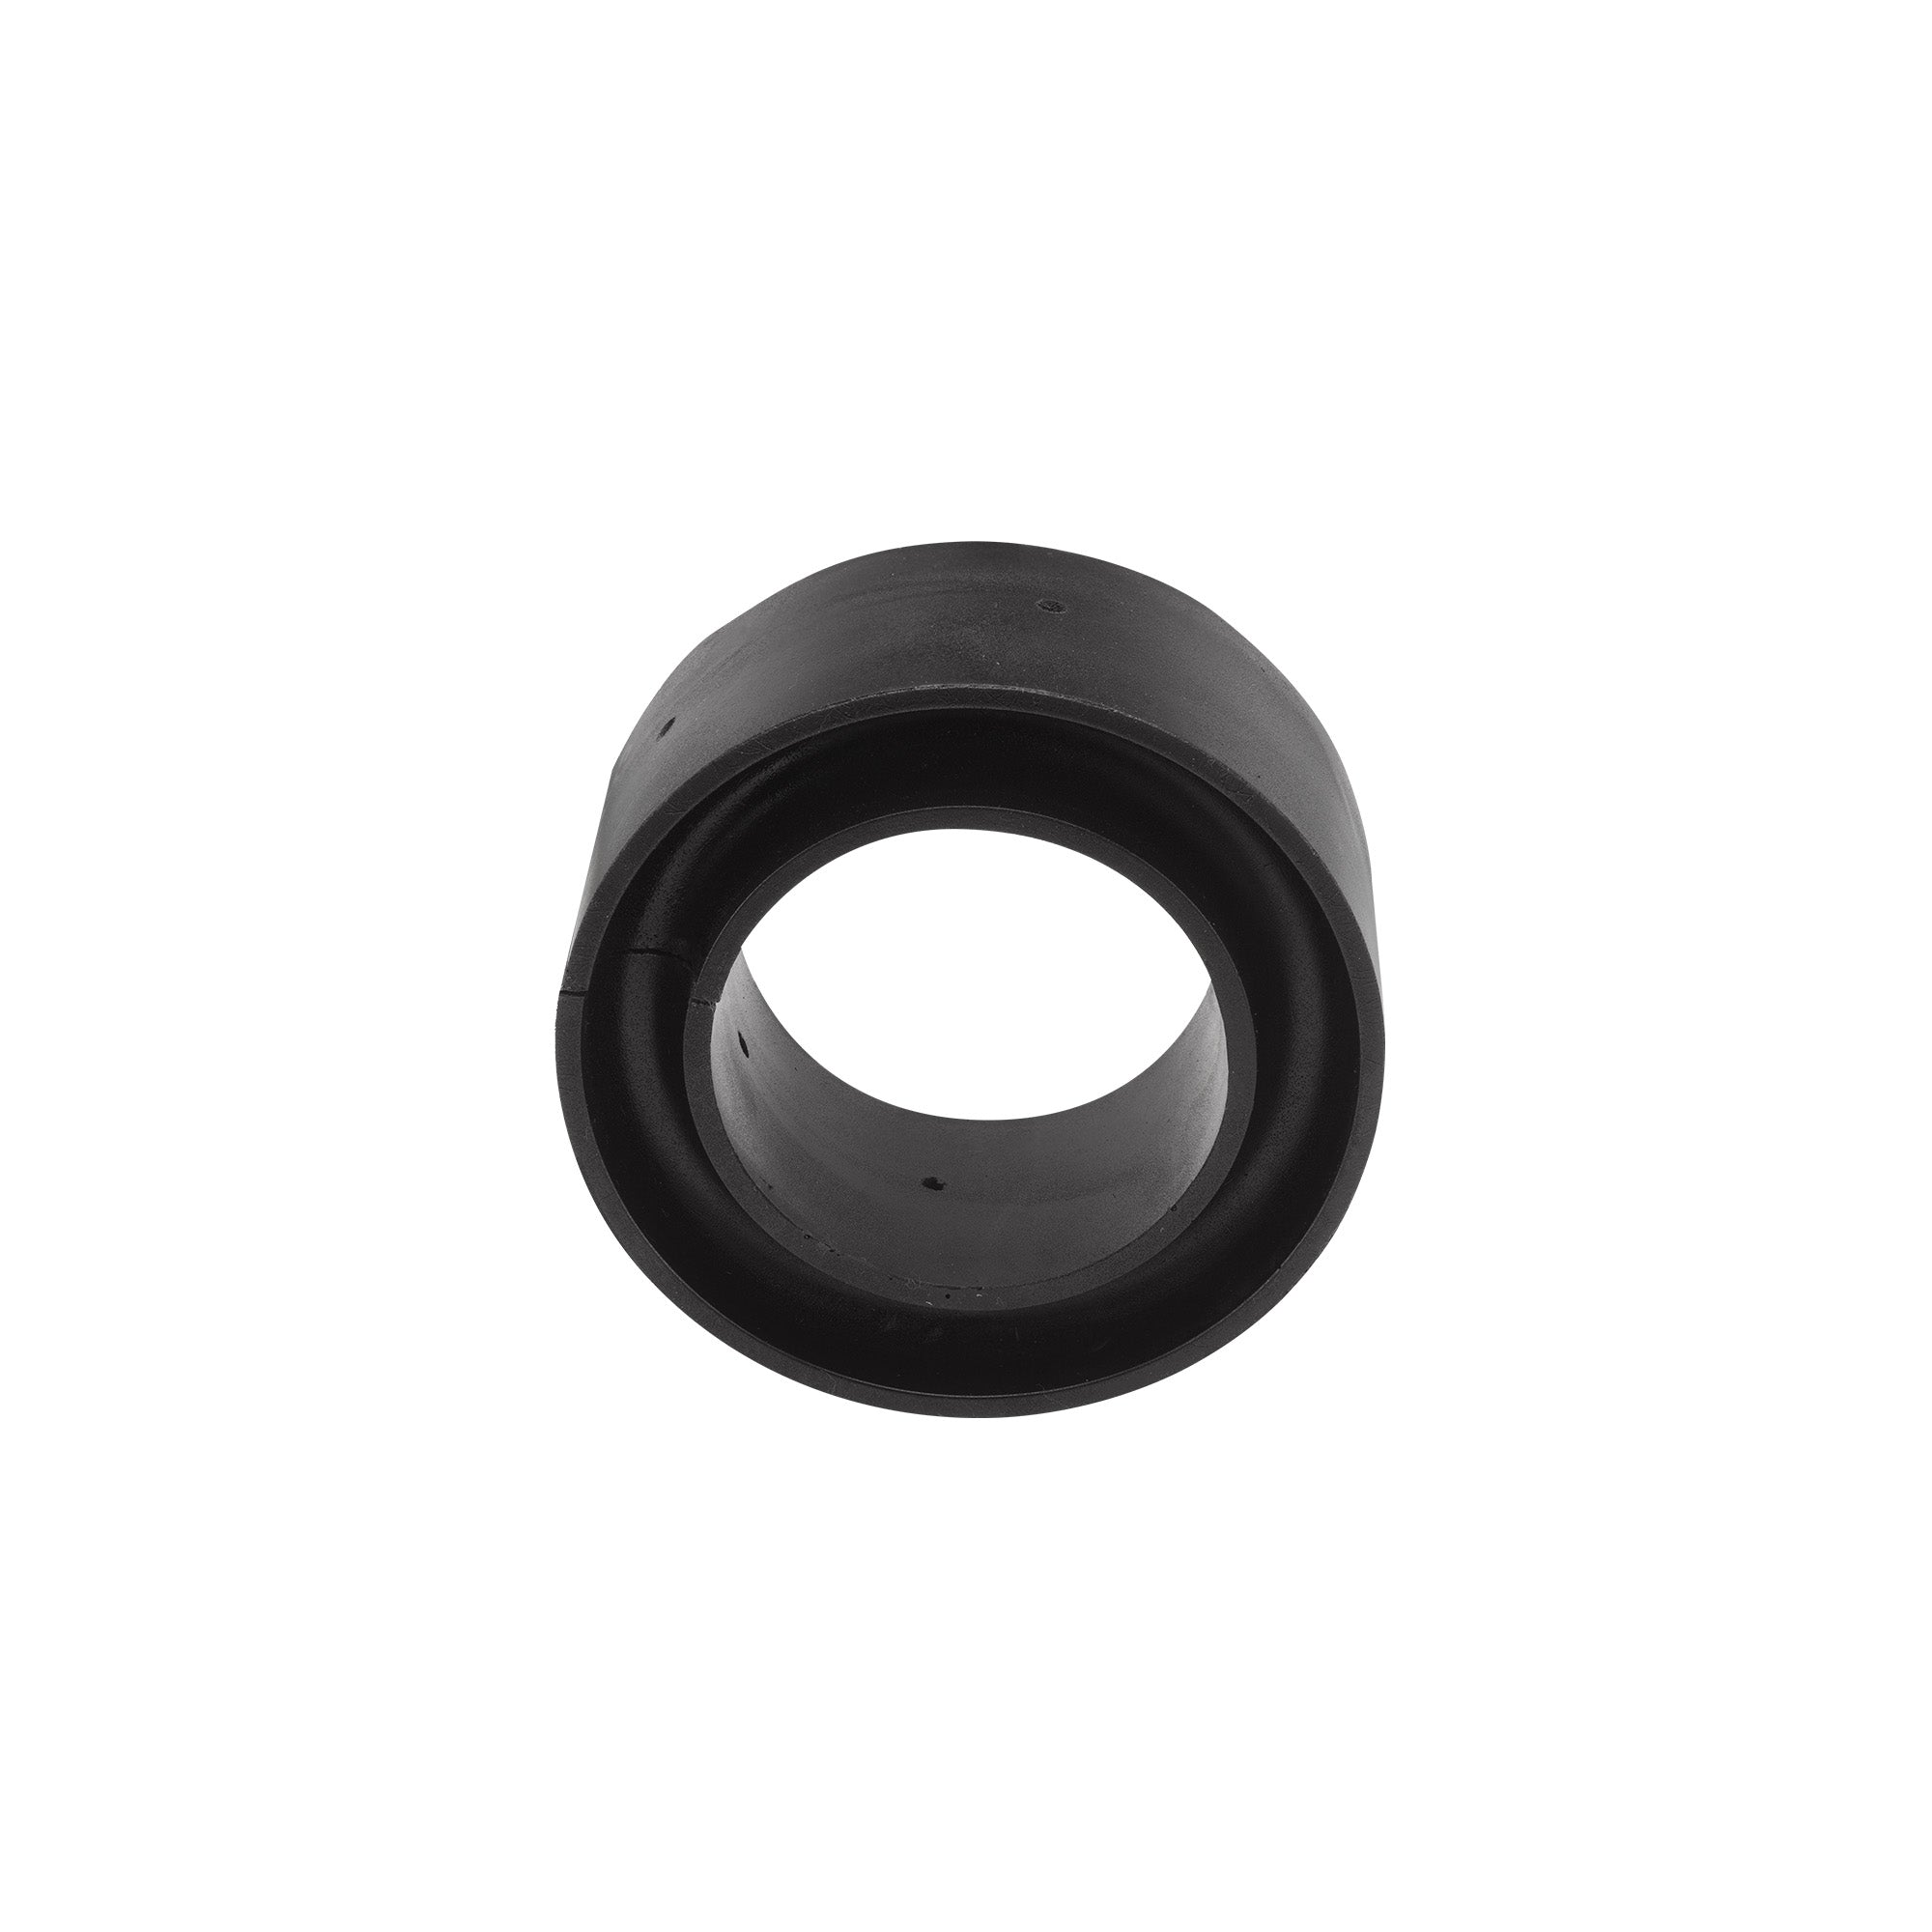 Super Springs Coil SumoSprings various applications 1.45 inch inner wall height Coil Spring Insert CSS-1145